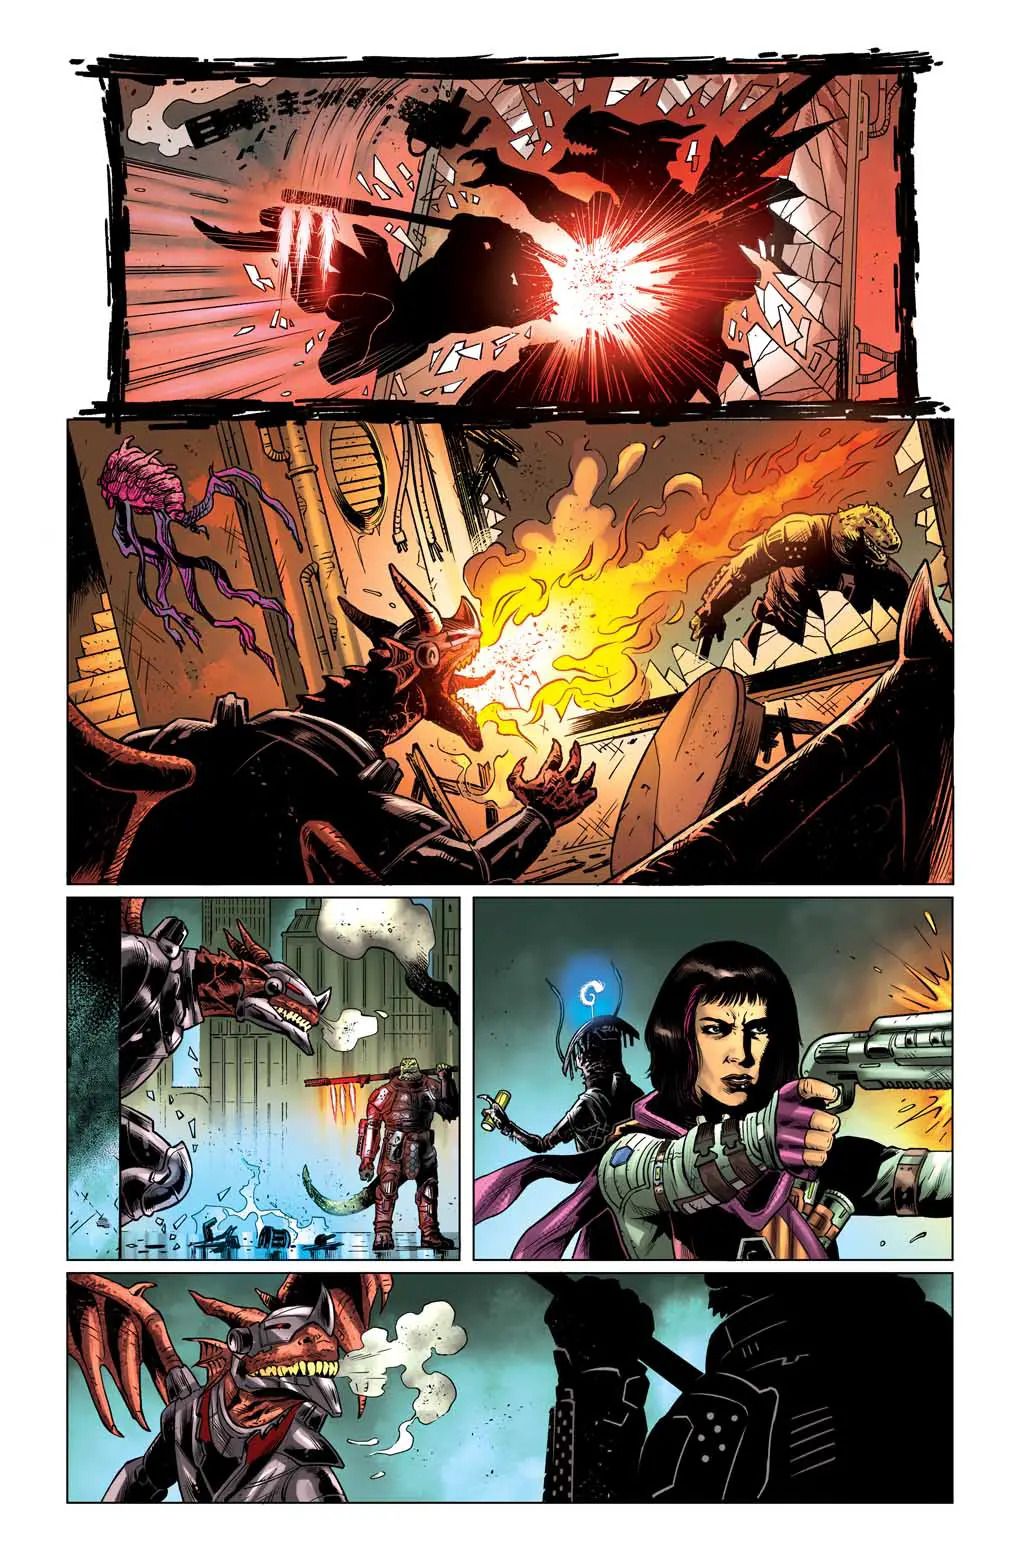 A dragon spits fire in Starfinder Angels of the Drift #1 Page 10